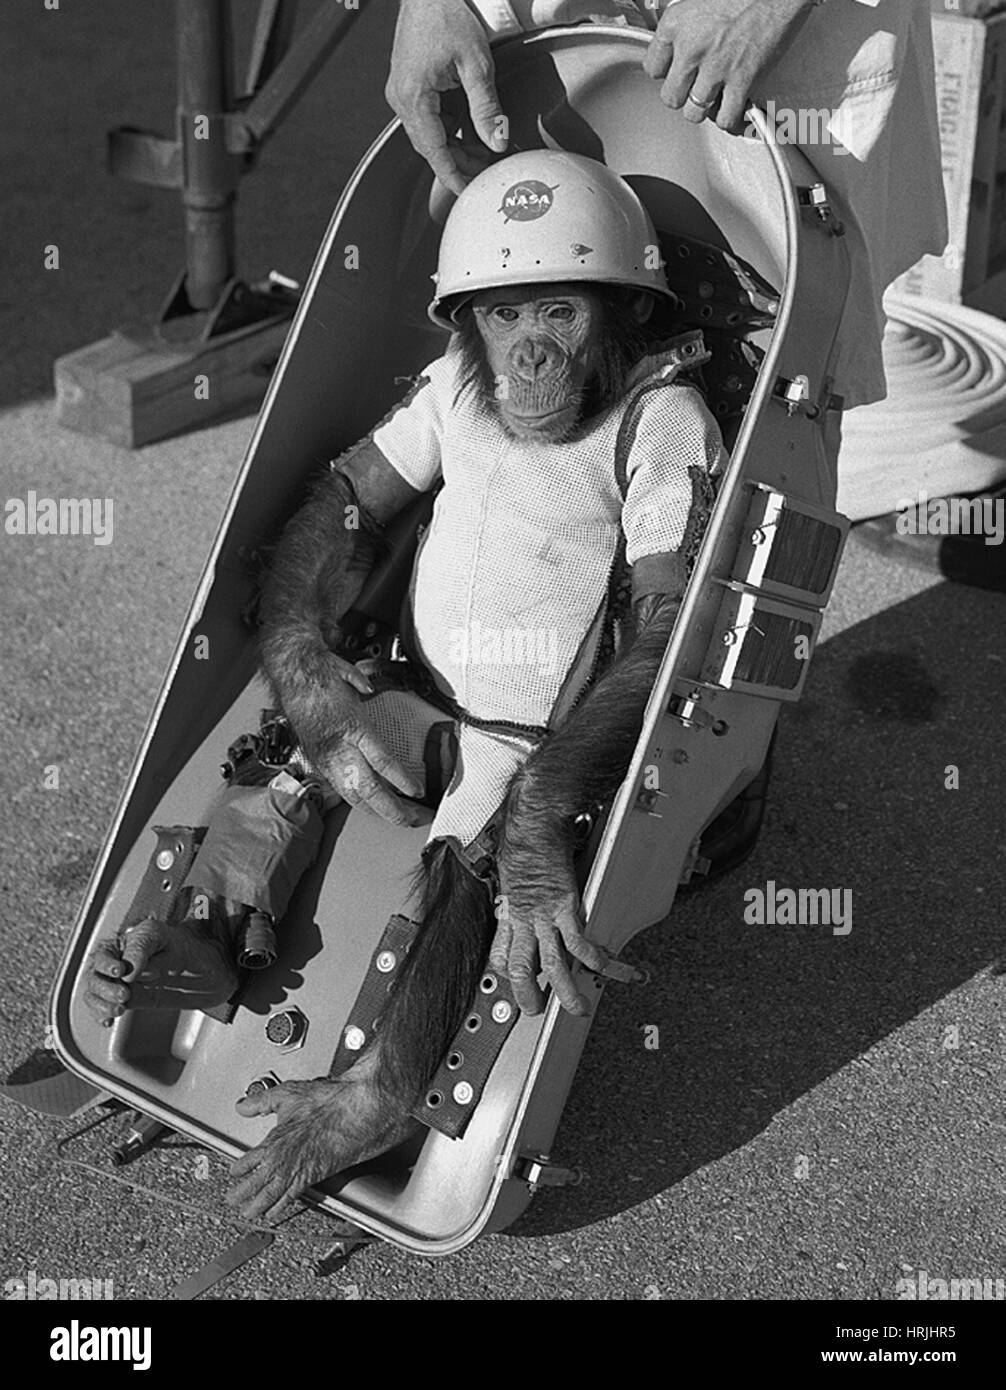 Ham, First Chimpanzee in Space, 1961 Stock Photo